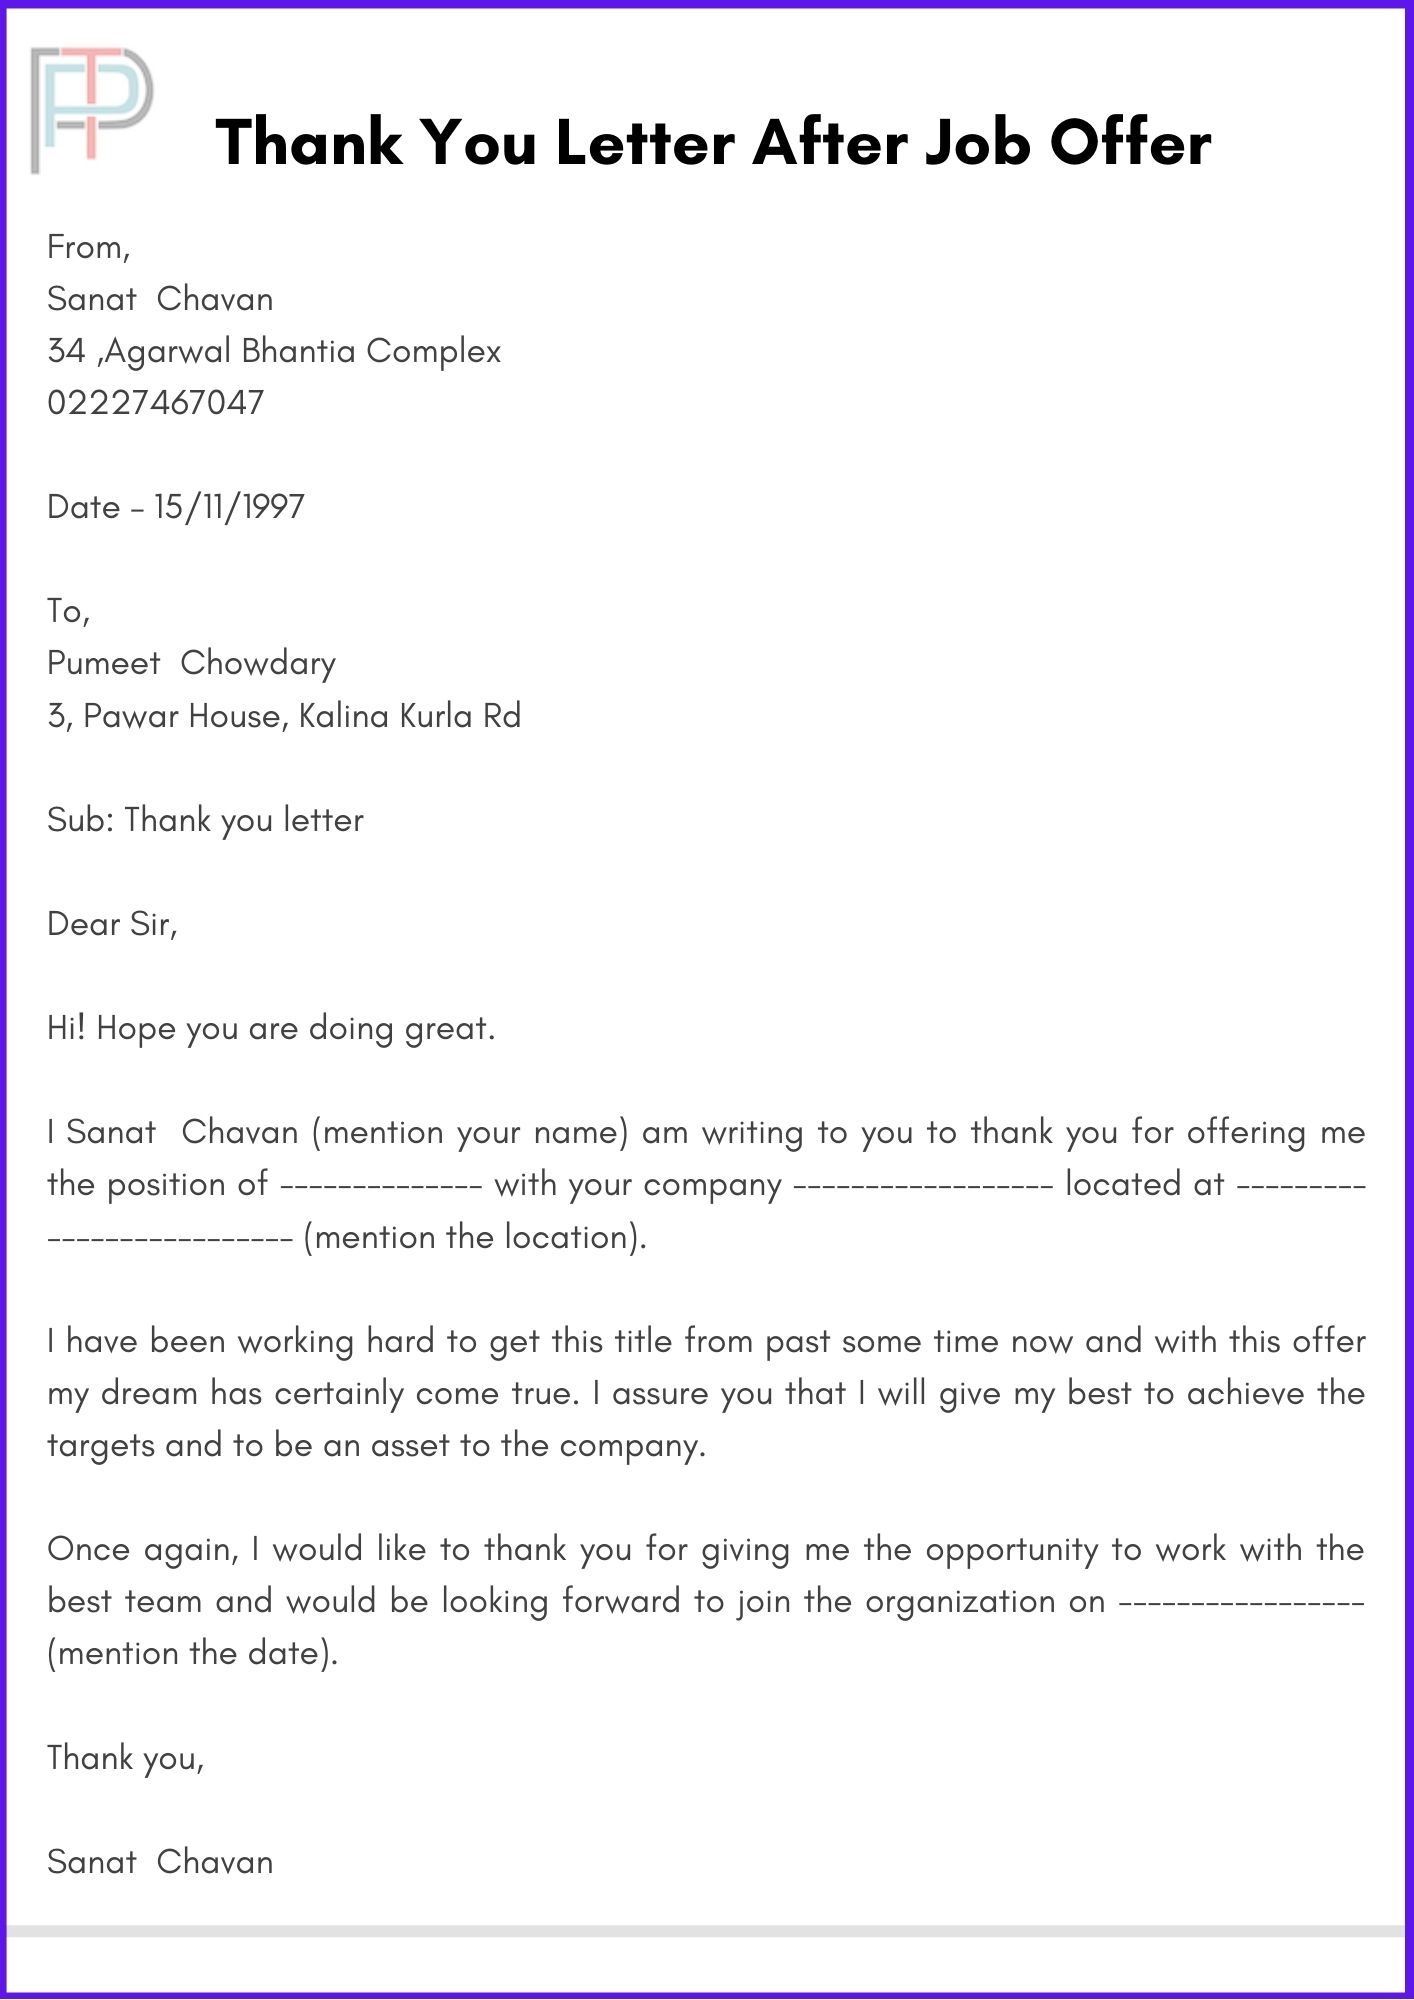 Thank You Letter After Job Offer | Premium Printable Templates